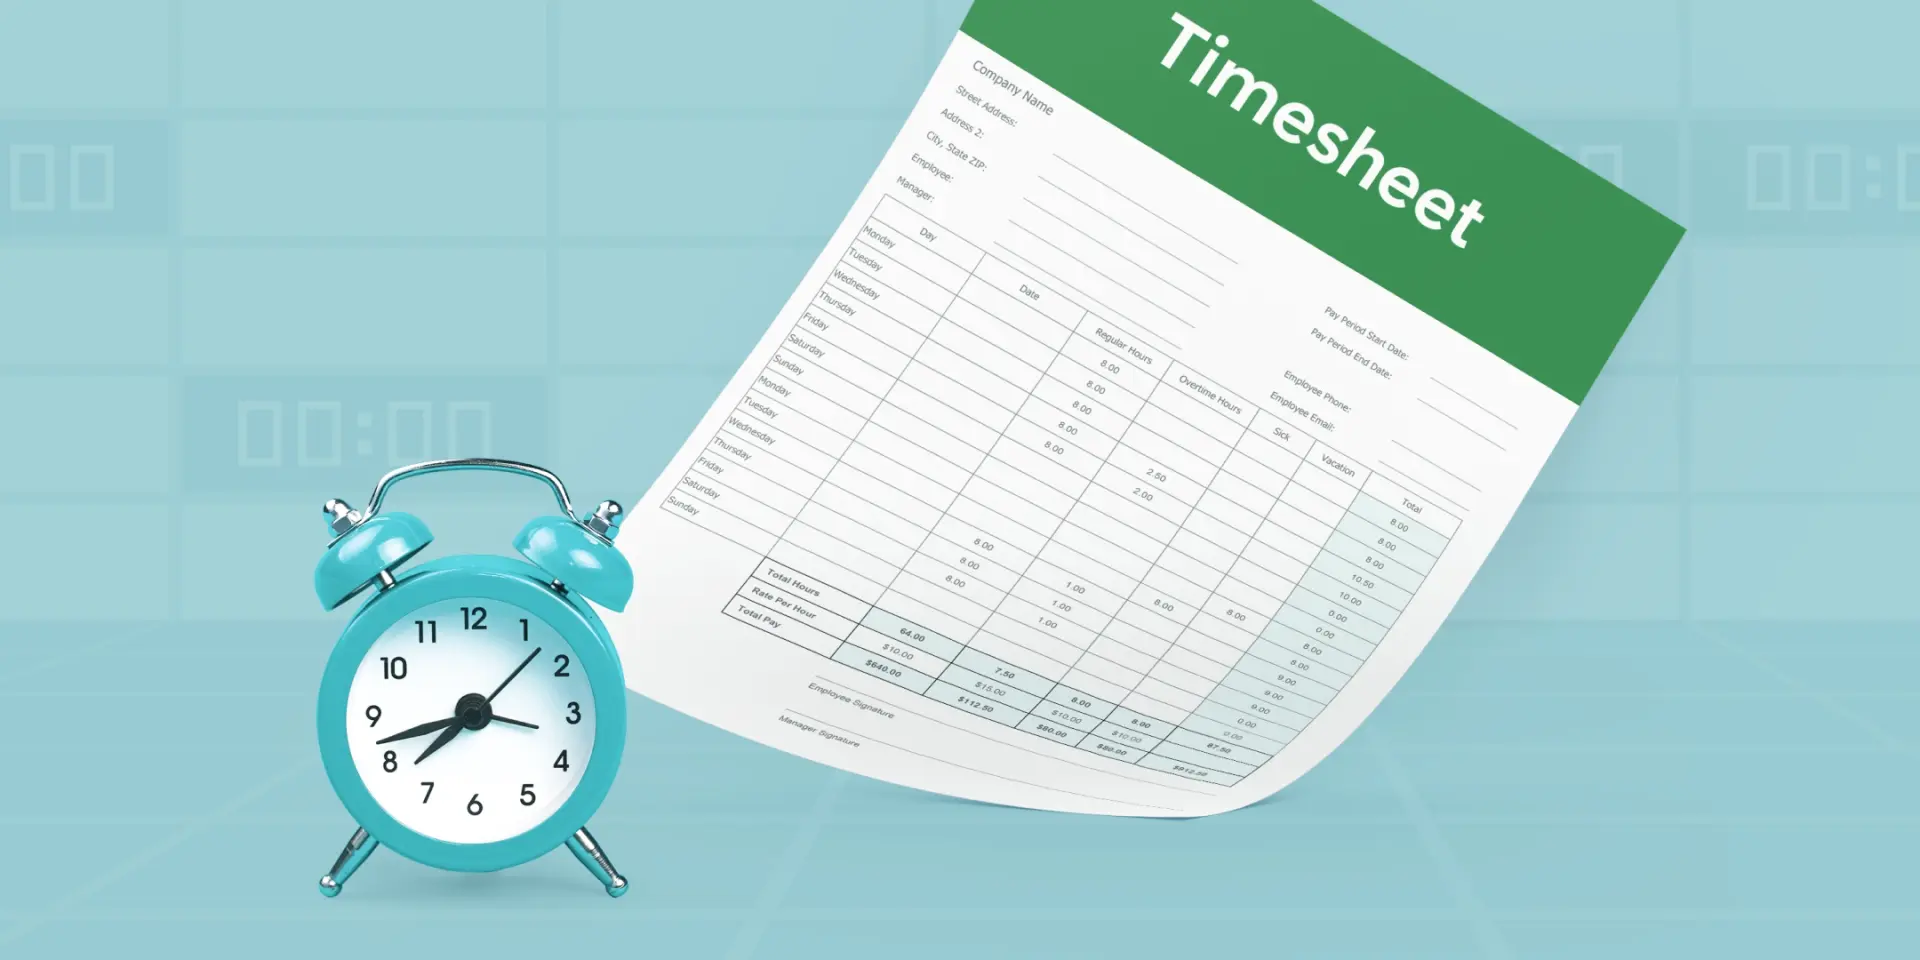 An aqua blue alarm clock sits in front of an example timesheet on a clean aqua-colored background